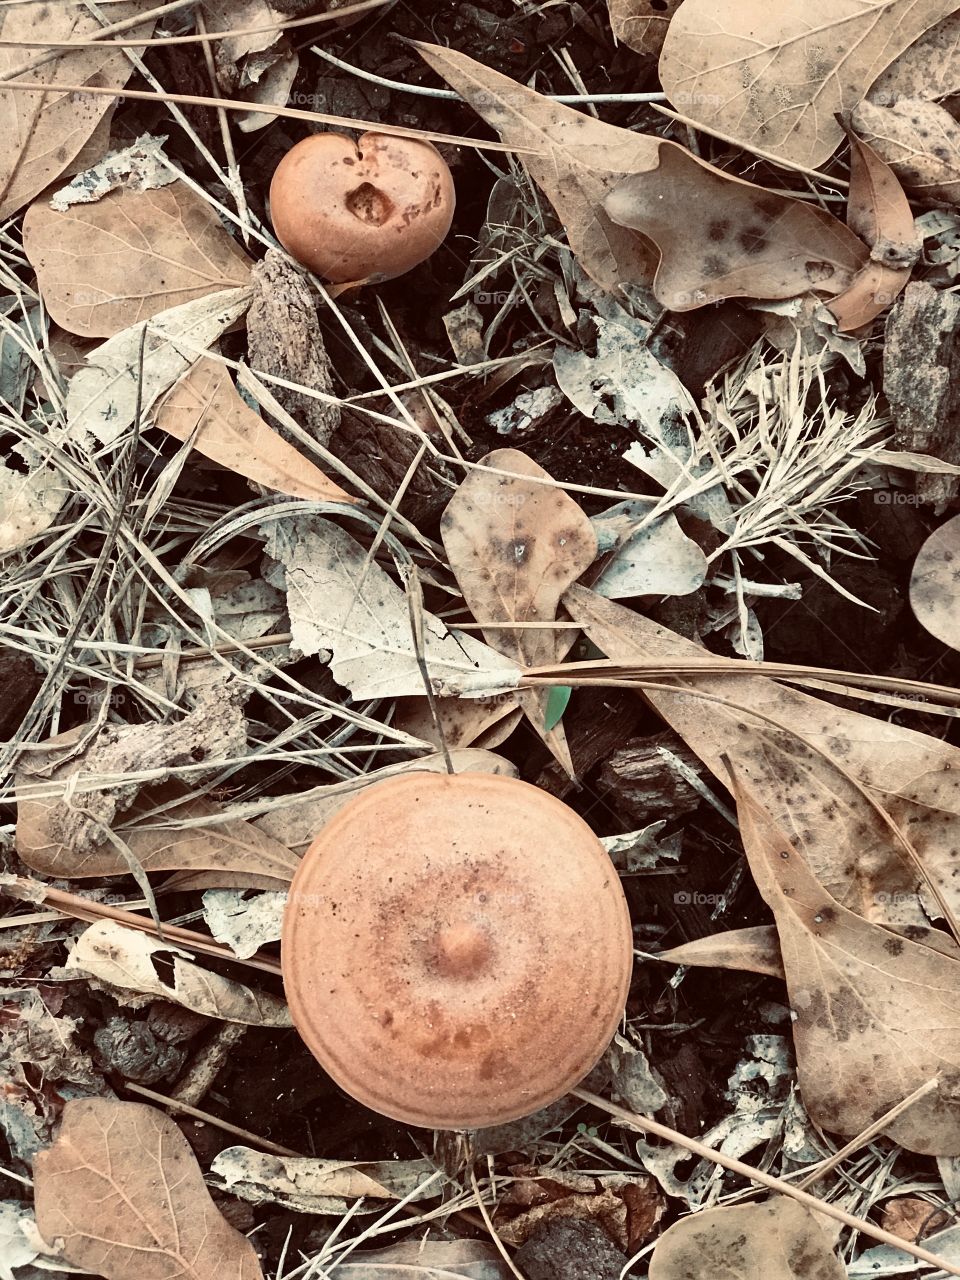 Little brown mushrooms snuggled in leaves found in the South Georgia woods.